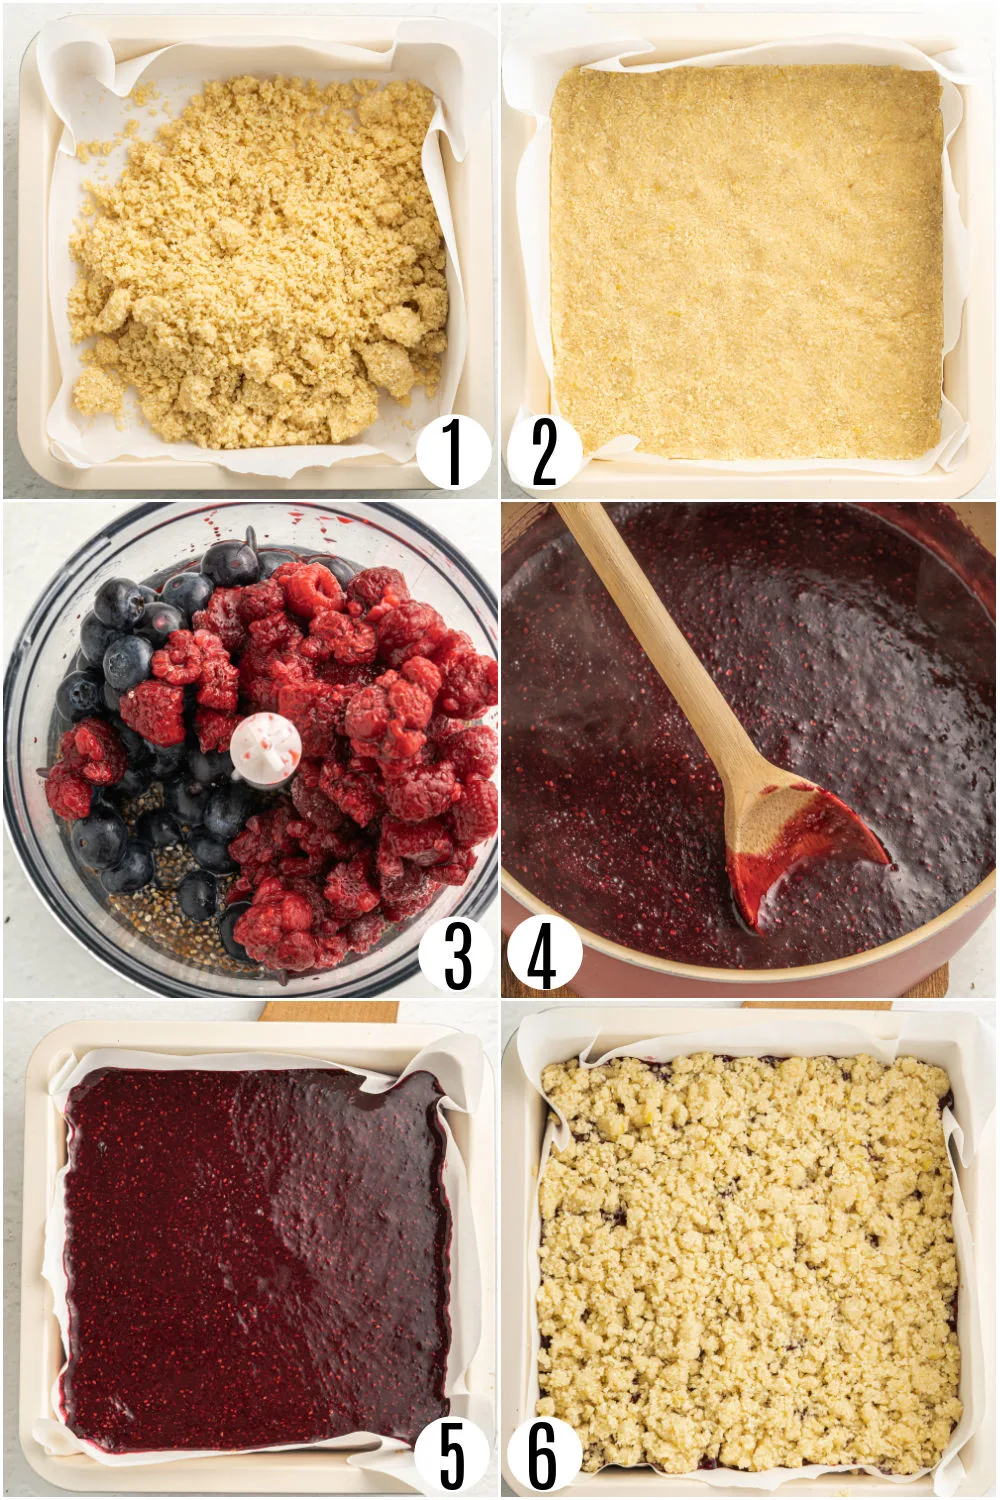 Step by step photos showing how to make berry crumble bars.